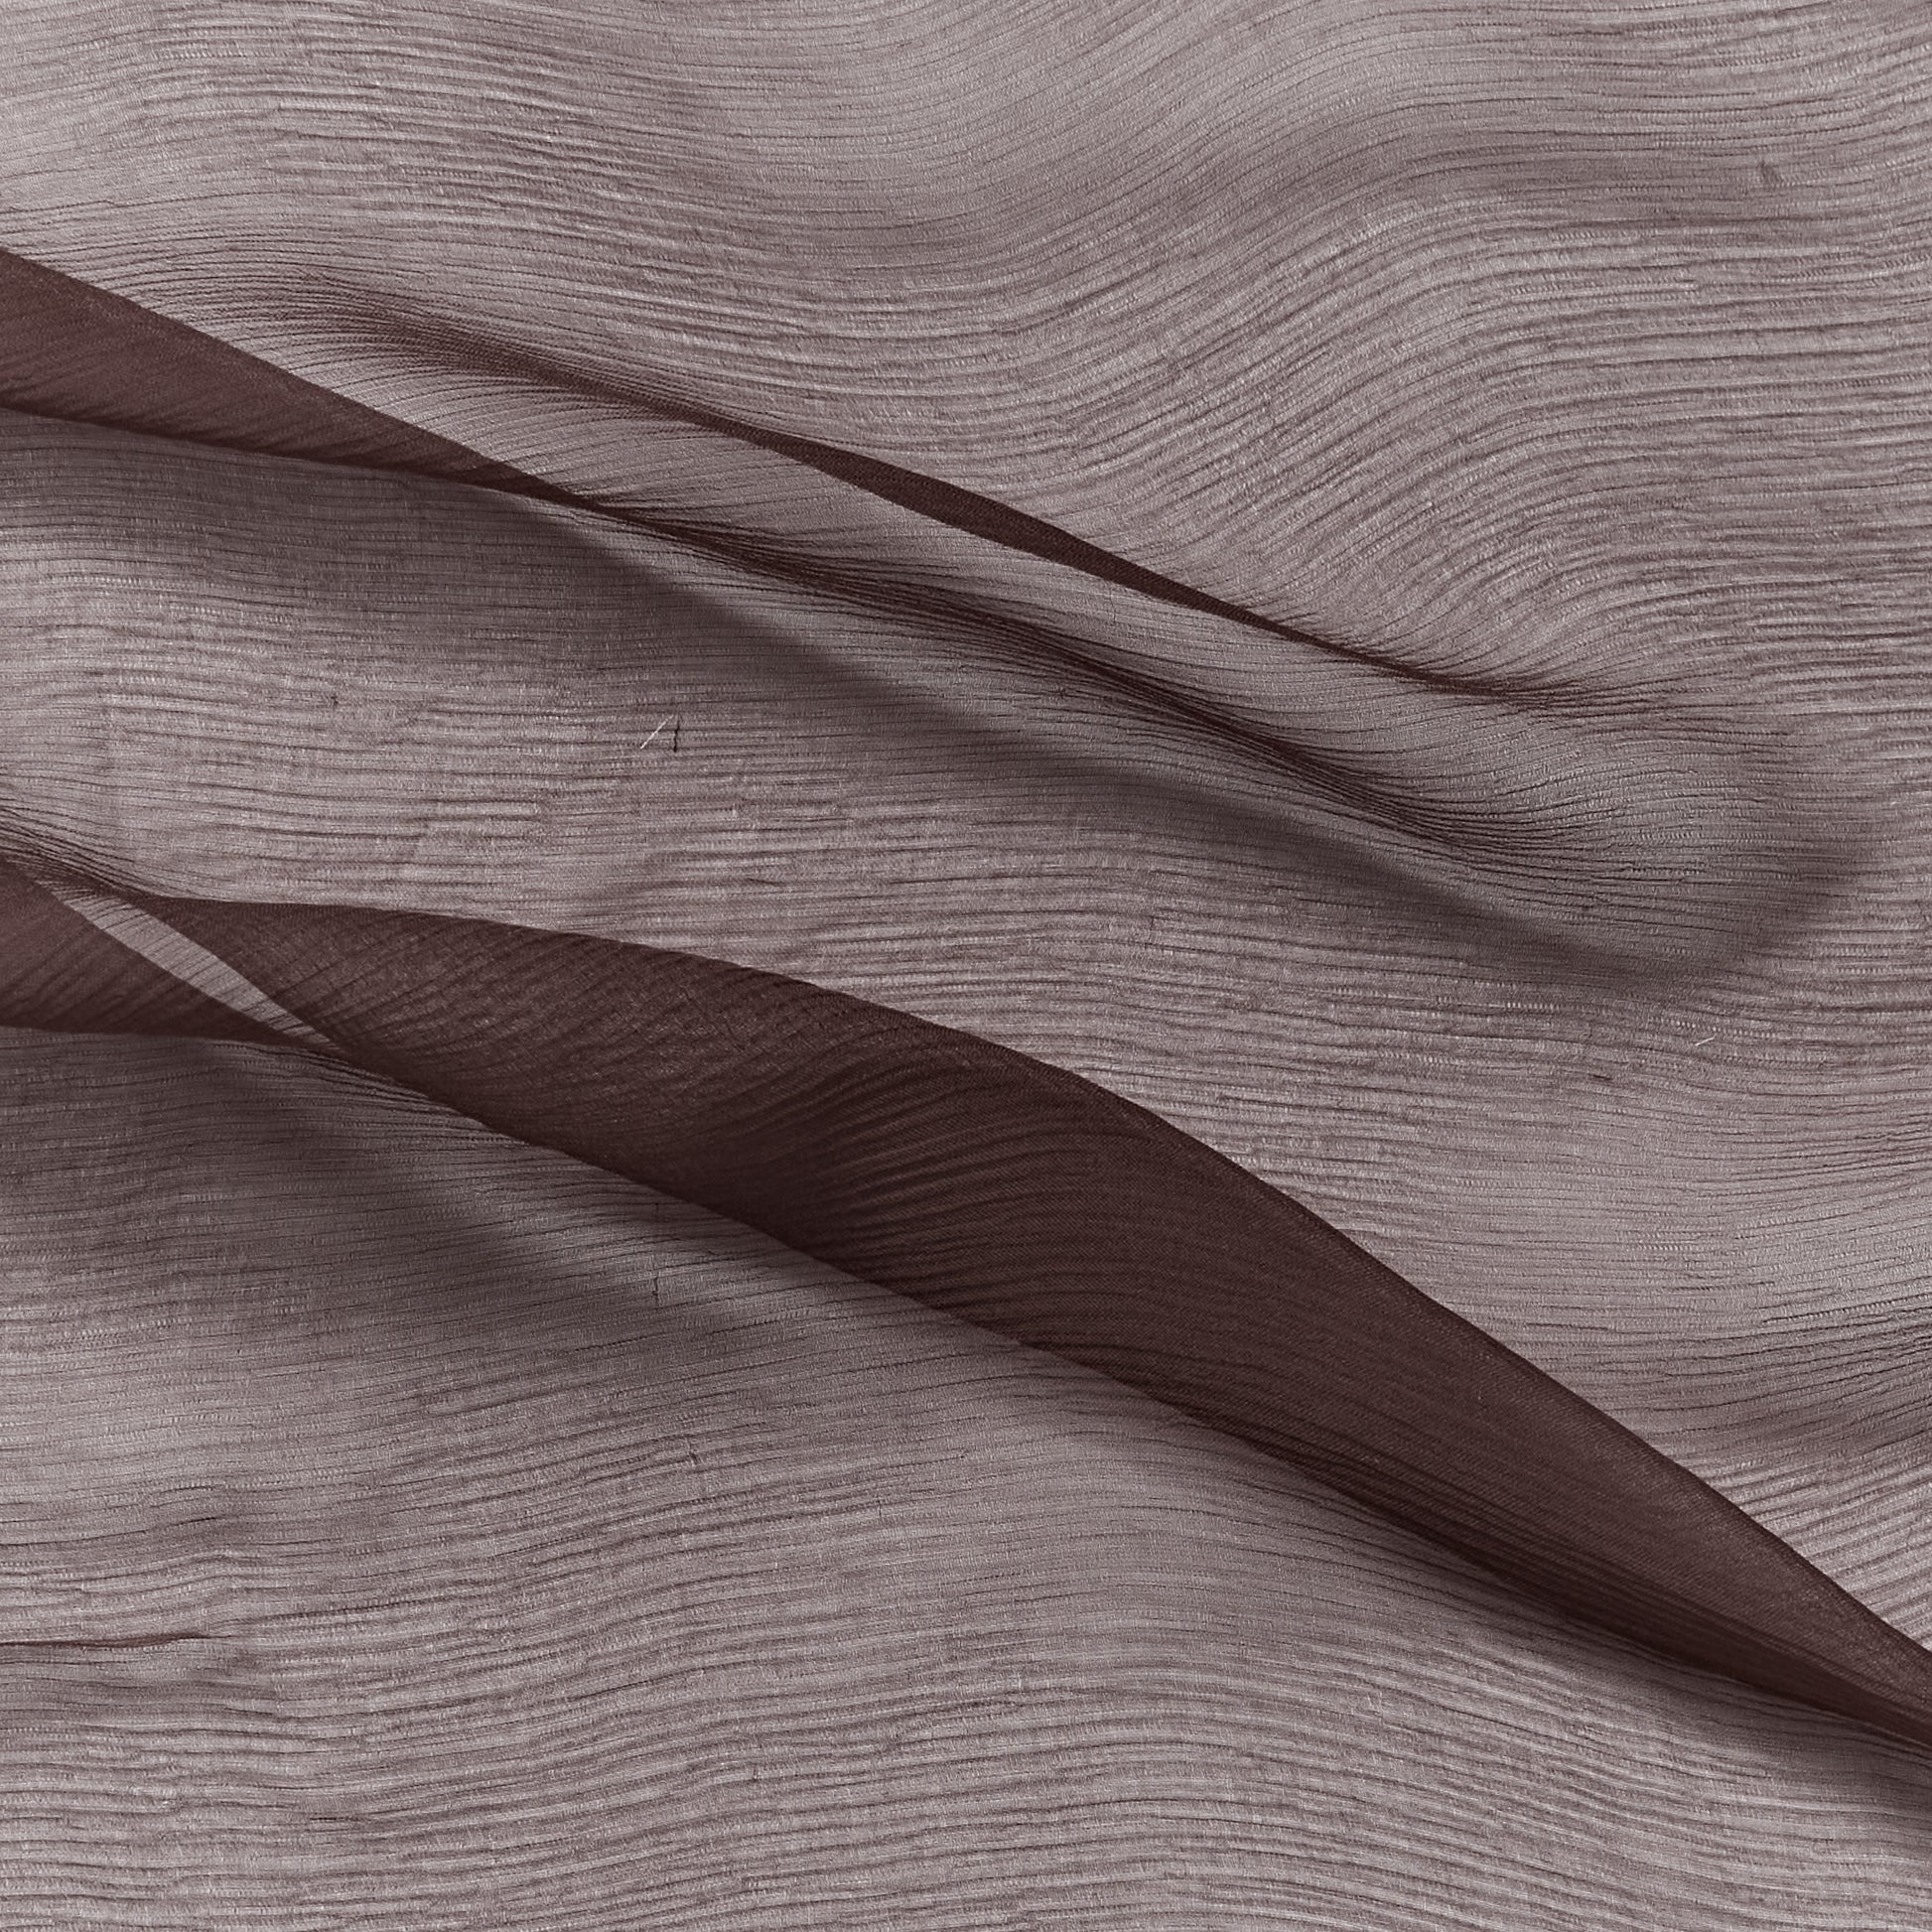 silk crinkle chiffon featuring the chocolate color version of a sheer soft pure silk with textured yoryu weave and fluid drape